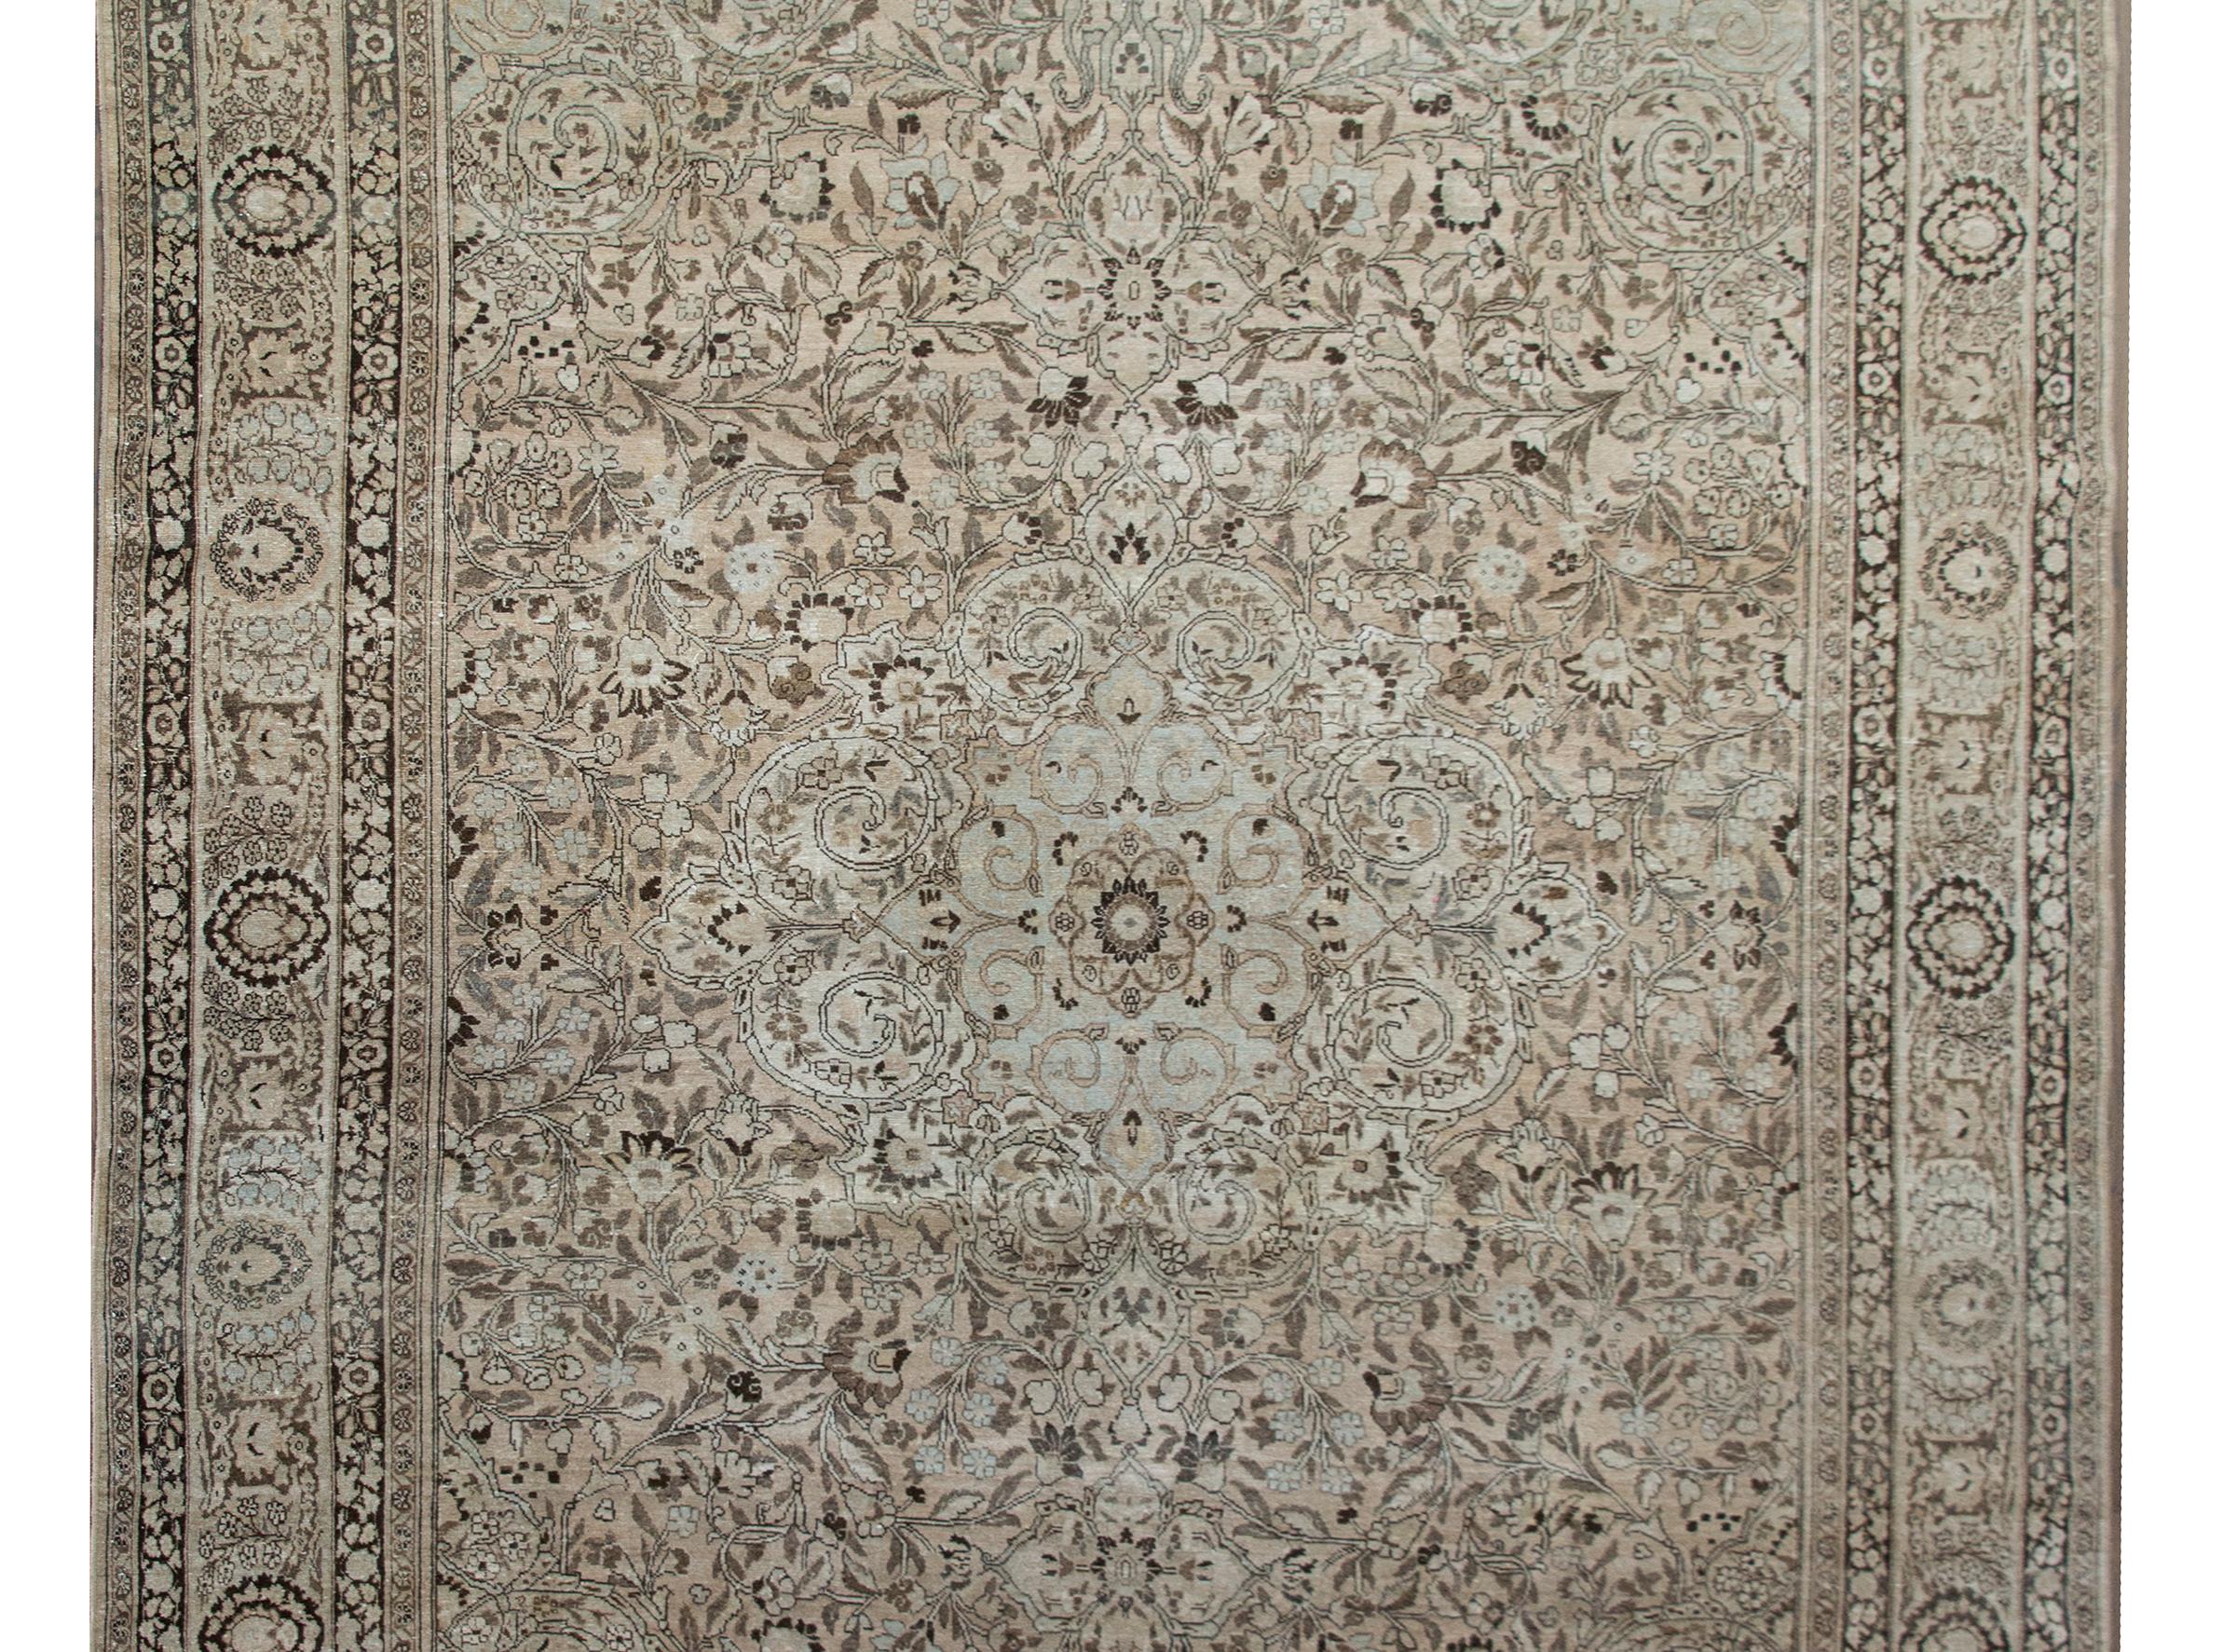 A chic Mid-20th Century Persian Tabriz rug with an all-over lacy floral and scrolling vine pattern surrounded by a complex border with more petite floral patterned stripes flanking a wide central floral stripe, and all woven in muted browns, grays,